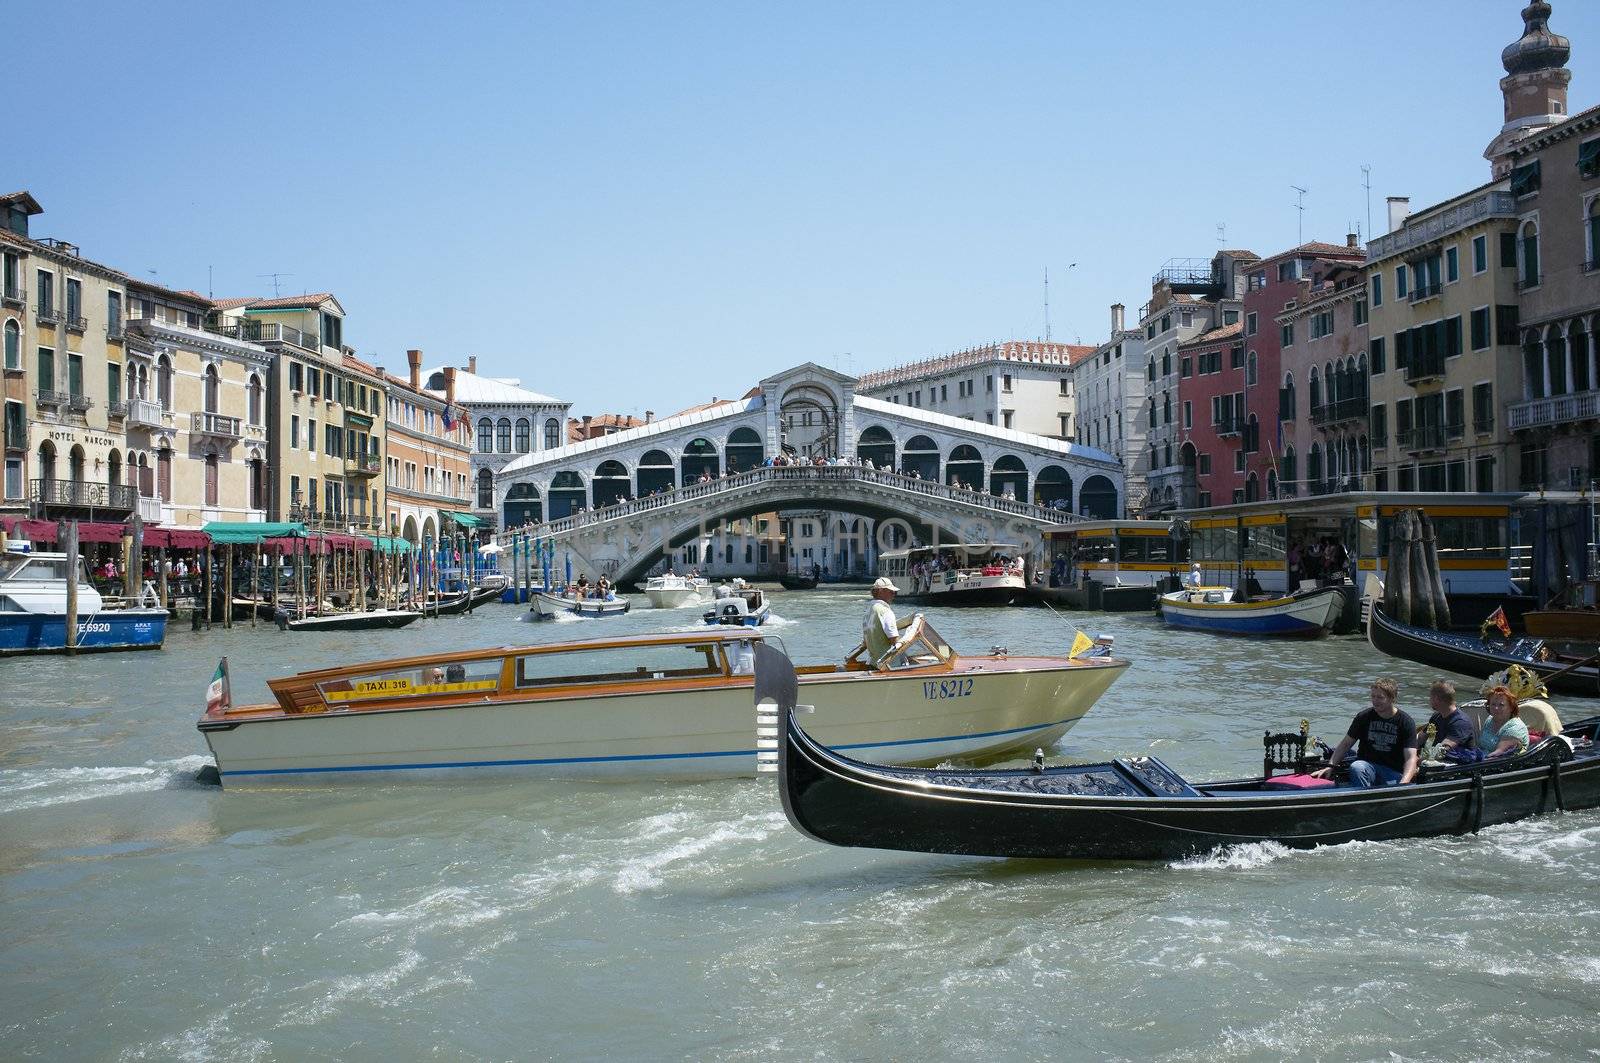 Venice, Veneto, Italy - May 25: The Grand Canal is a canal in Venice, Italy. It forms one of the major water-traffic corridors in the city. Public transport is provided by water buses and private water taxis, and many tourists explore the canal by gondola. May 25, 2011 in Venice, Veneto, Italy